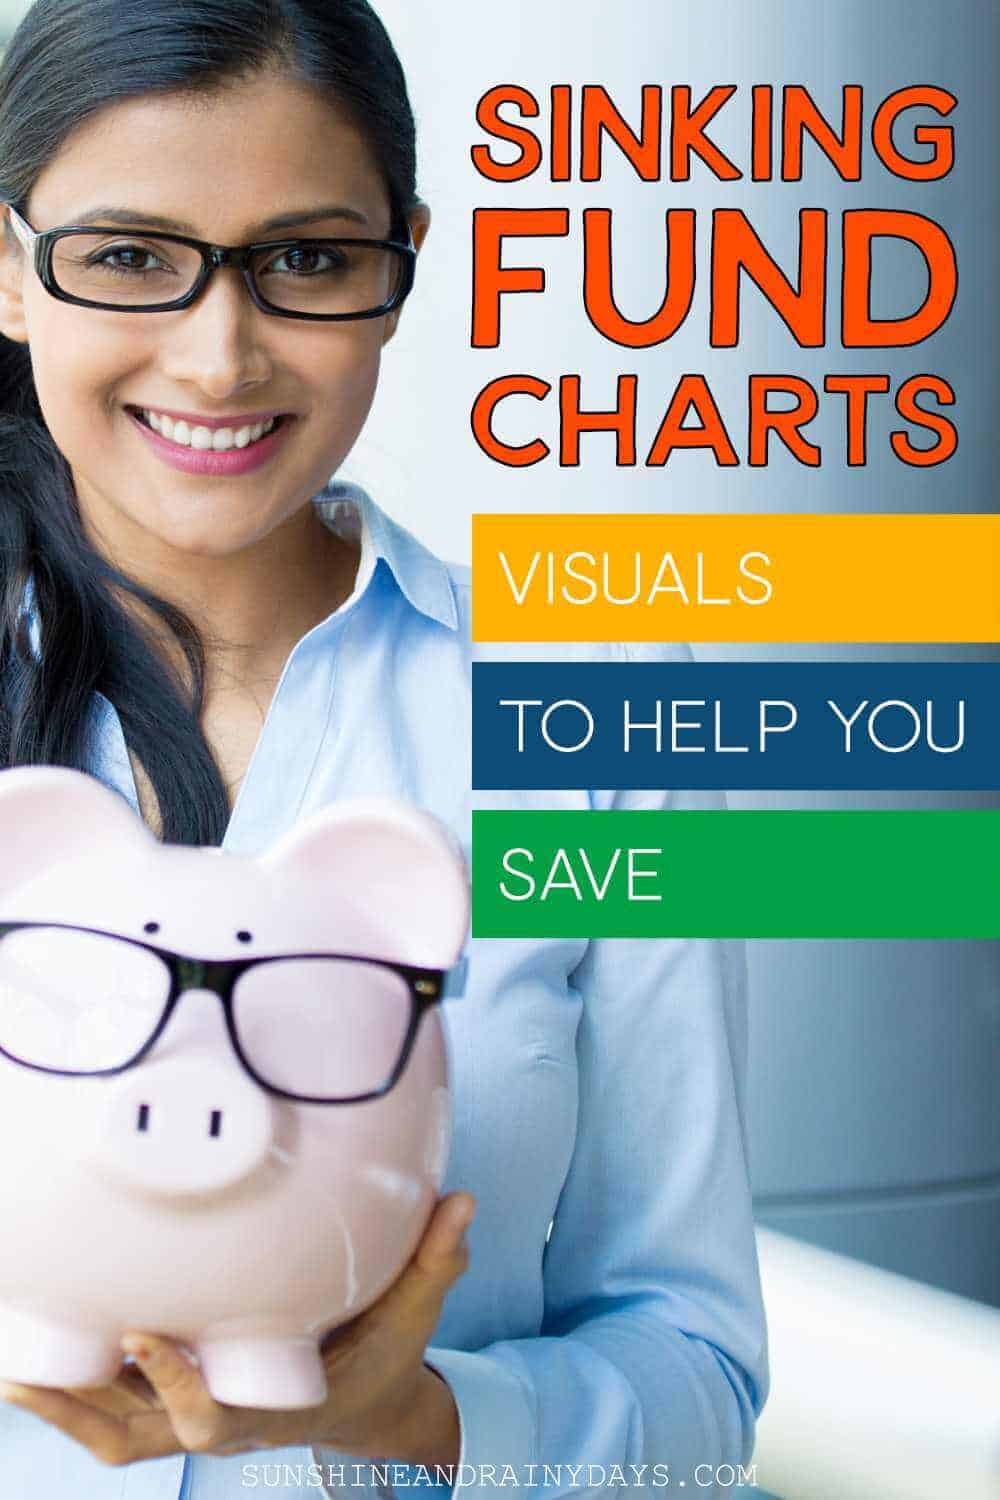 Lady holding piggy bank with the words: Sinking Fund Charts, Visuals To Help You Save